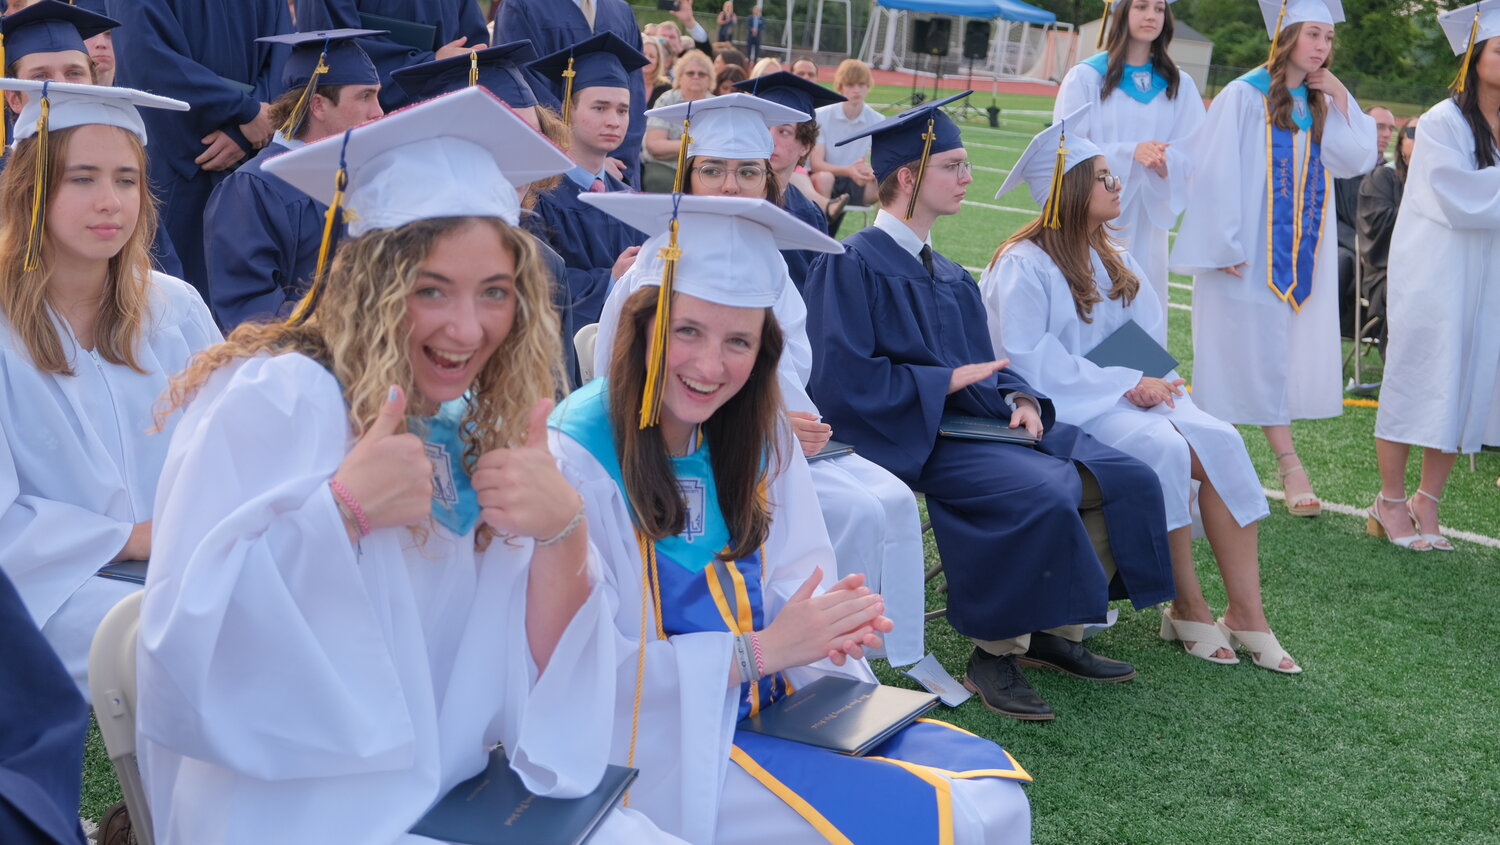 New Hope-Solebury High School Class Officer Sophia Cozza and Class President Abby Prosser are all smiles at the start of the June 13 graduation ceremony.